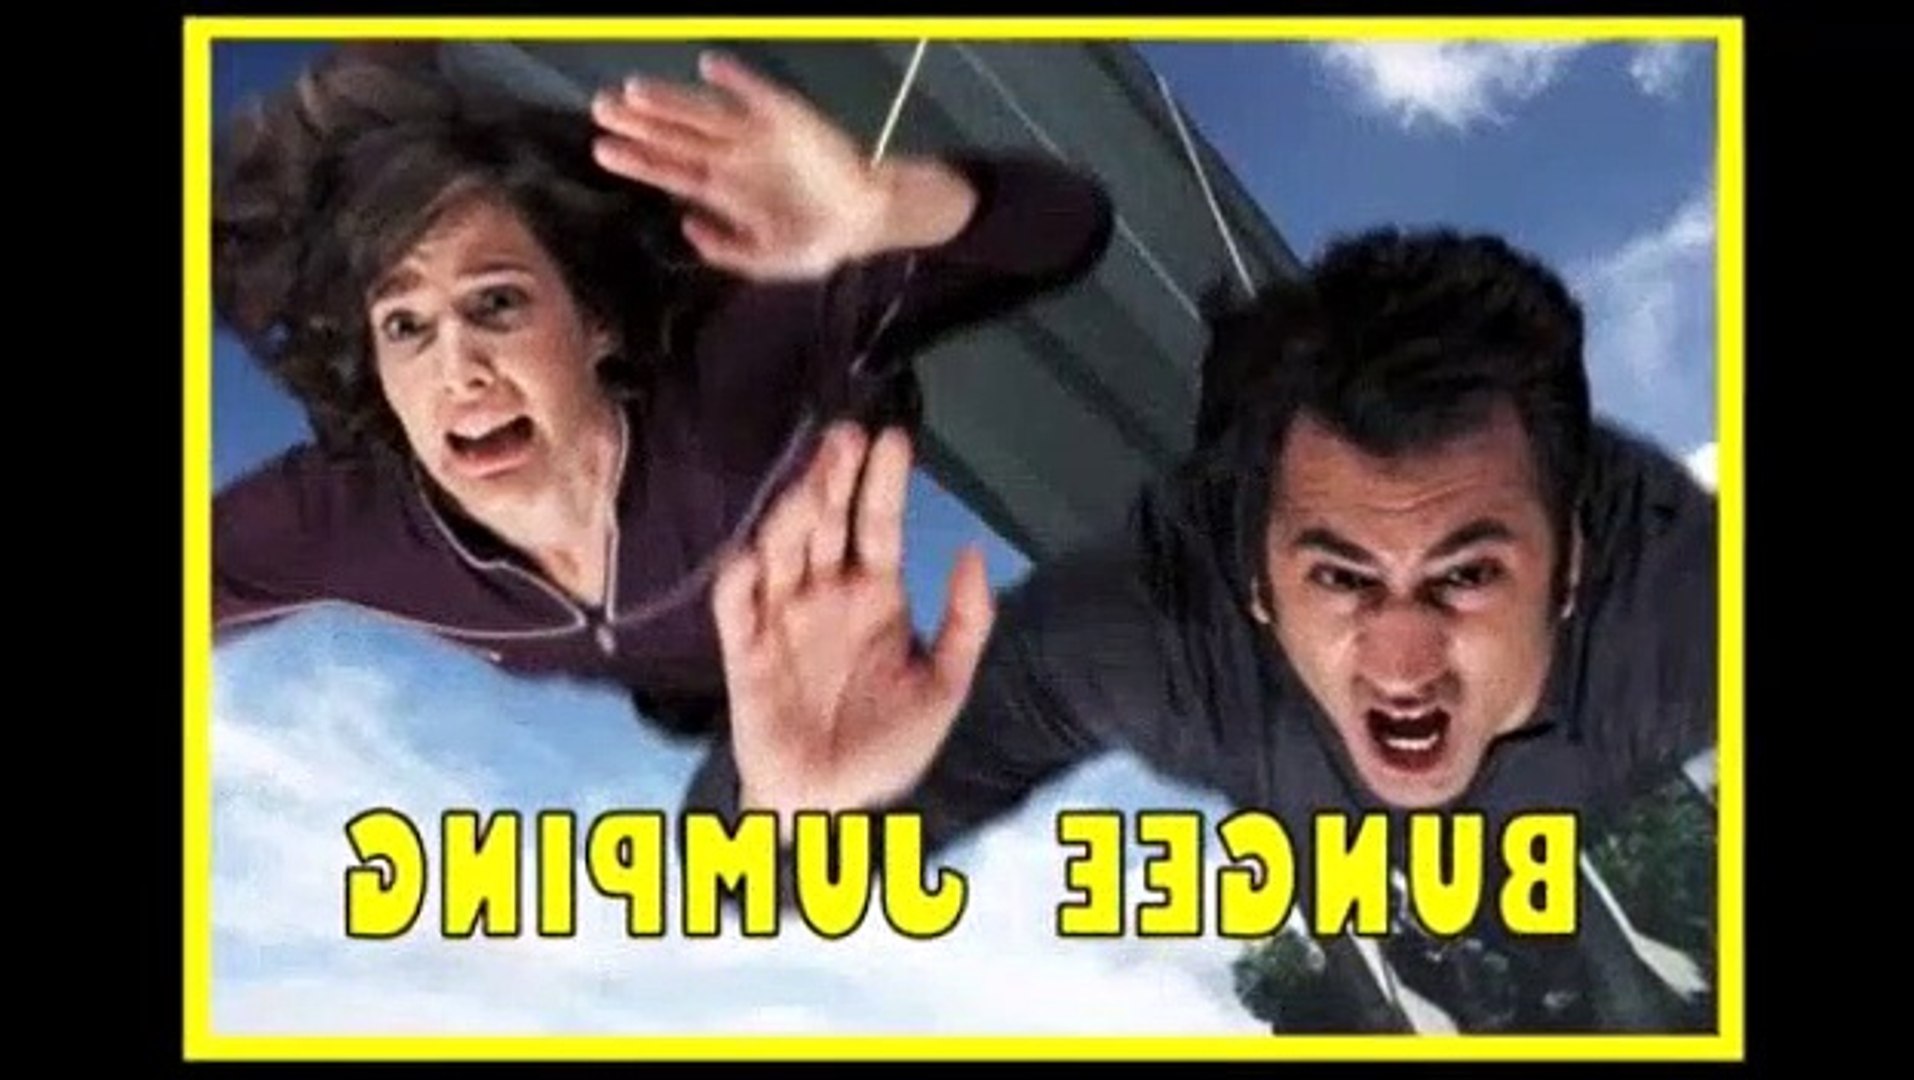 How I Met Your Mother S07E14 - 46 Minutes - video Dailymotion